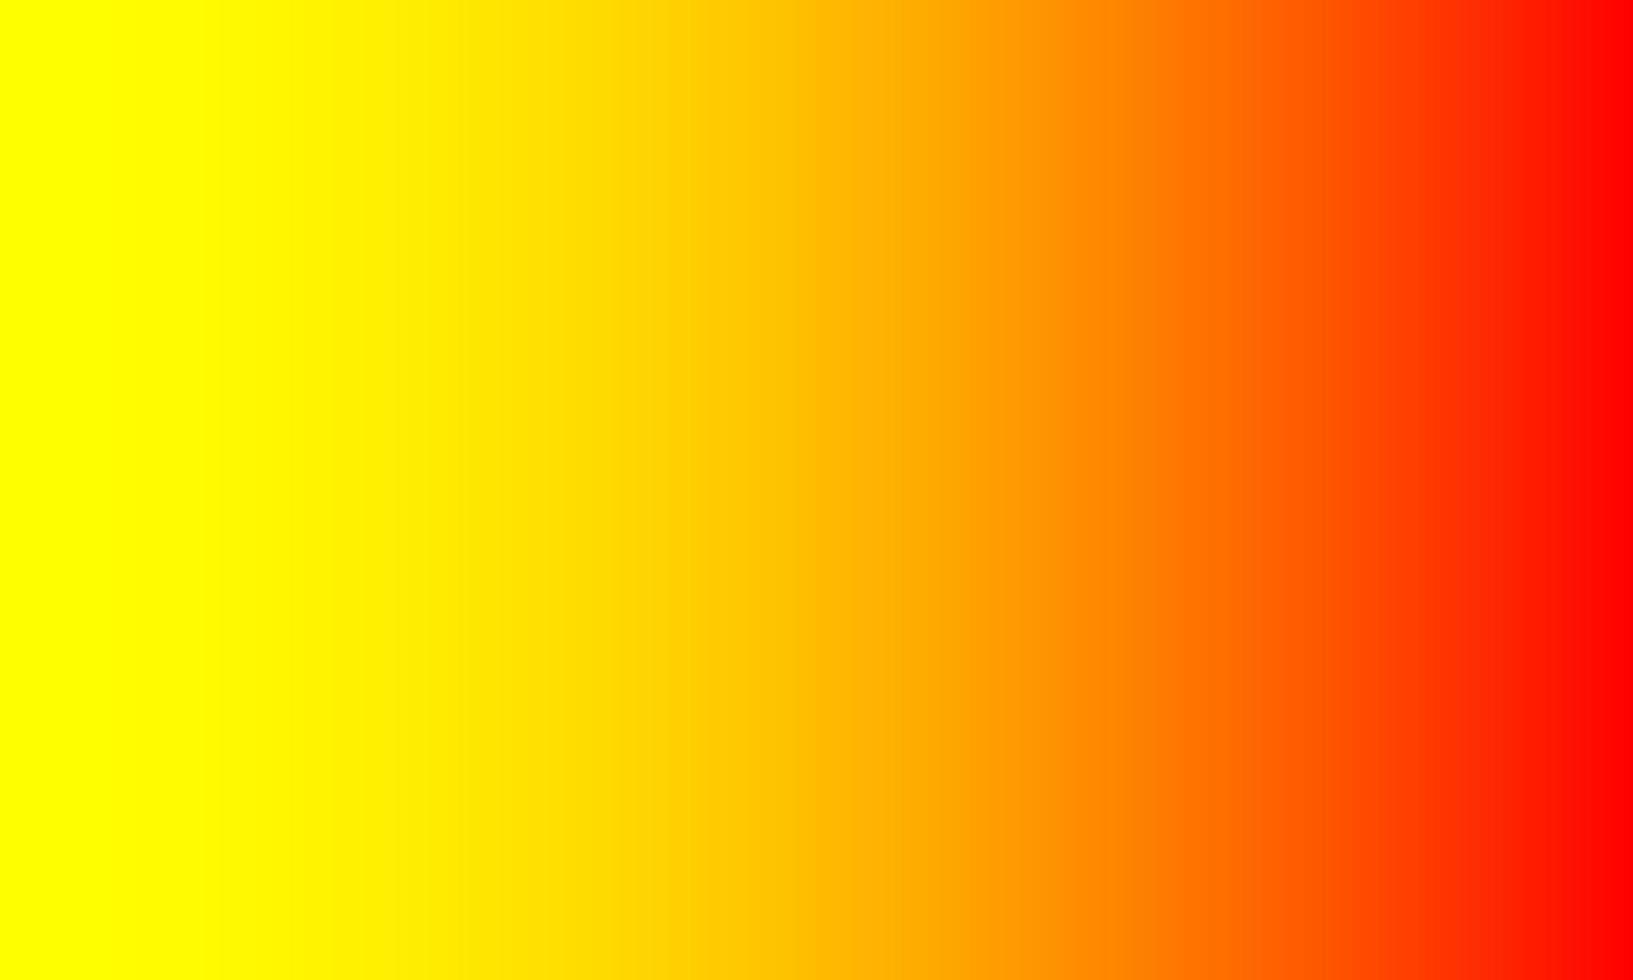 gradient background. yellow and red. abstract, simple, cheerful and clean style. suitable for copy space, wallpaper, background, banner, flyer or decor vector